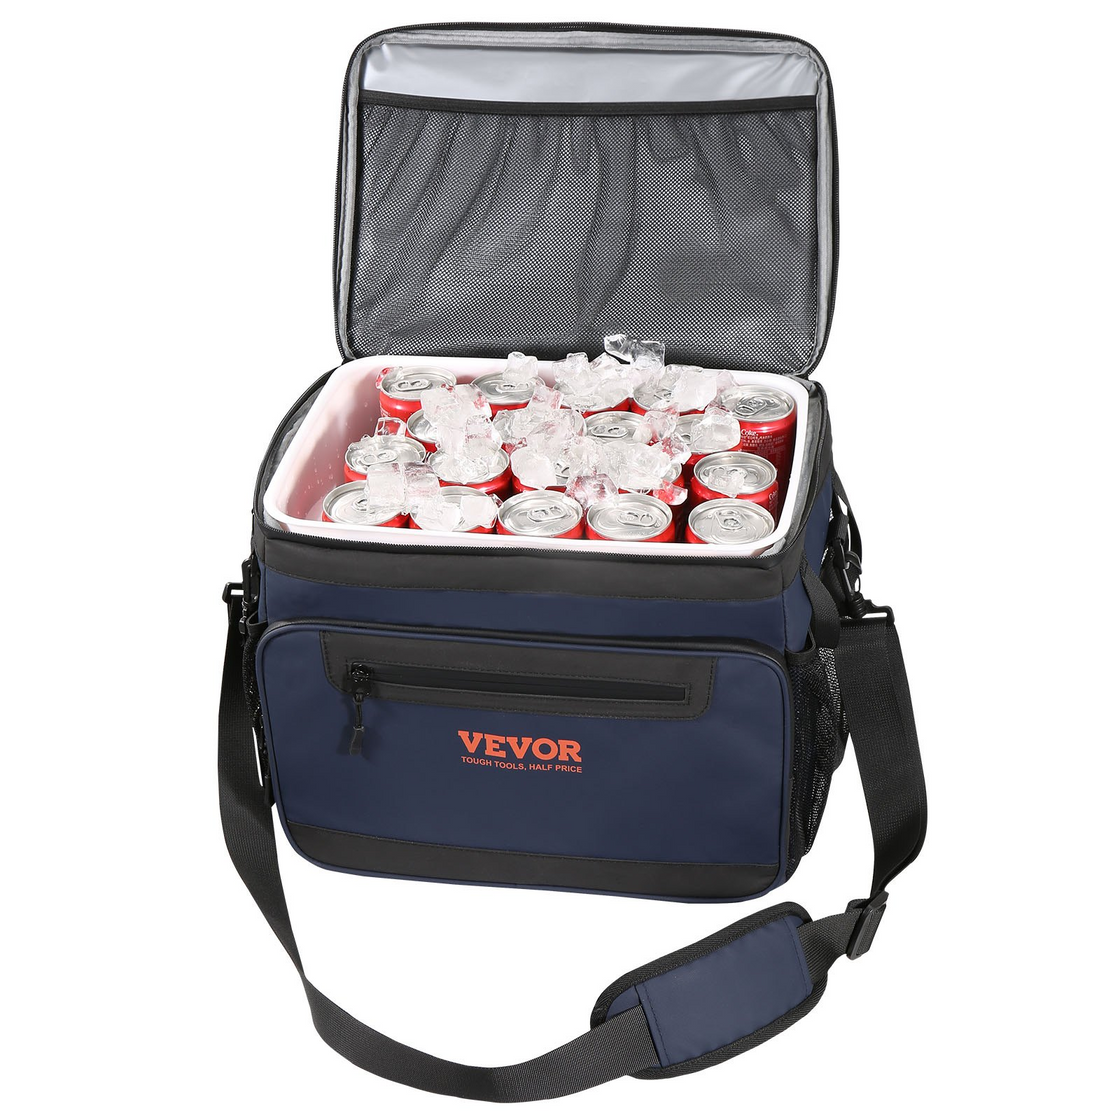 VEVOR Hardbody Cooler Bag, 30 Cans - Insulated, Leakproof, and Waterproof